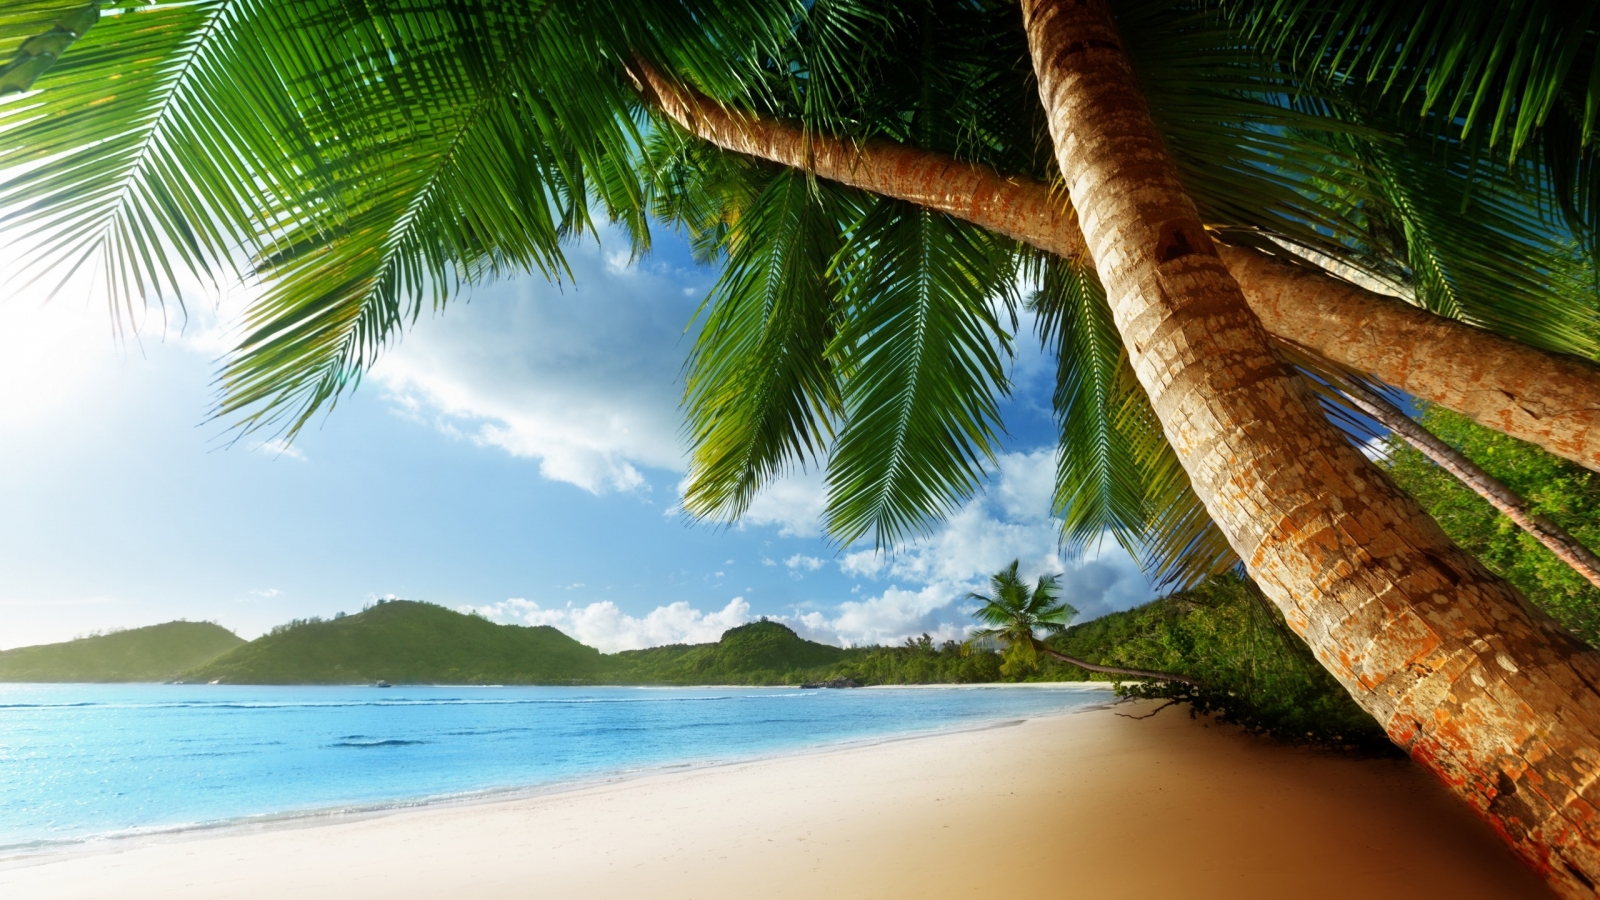 Exotic Palm Island for 1600 x 900 HDTV resolution